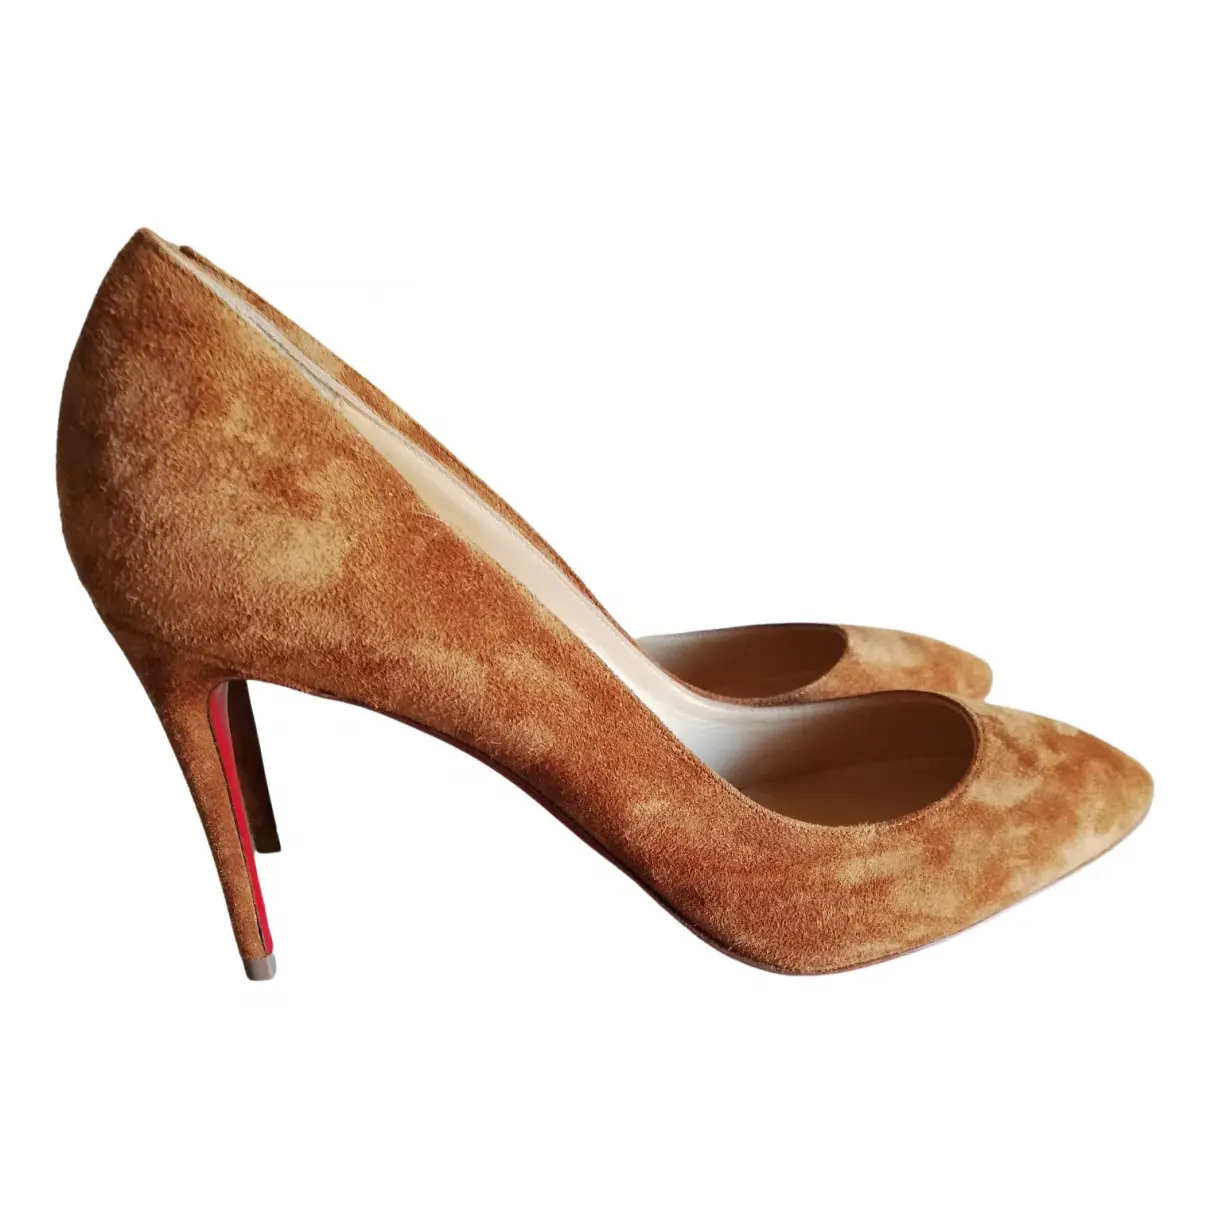 Pigalle heels Christian Louboutin